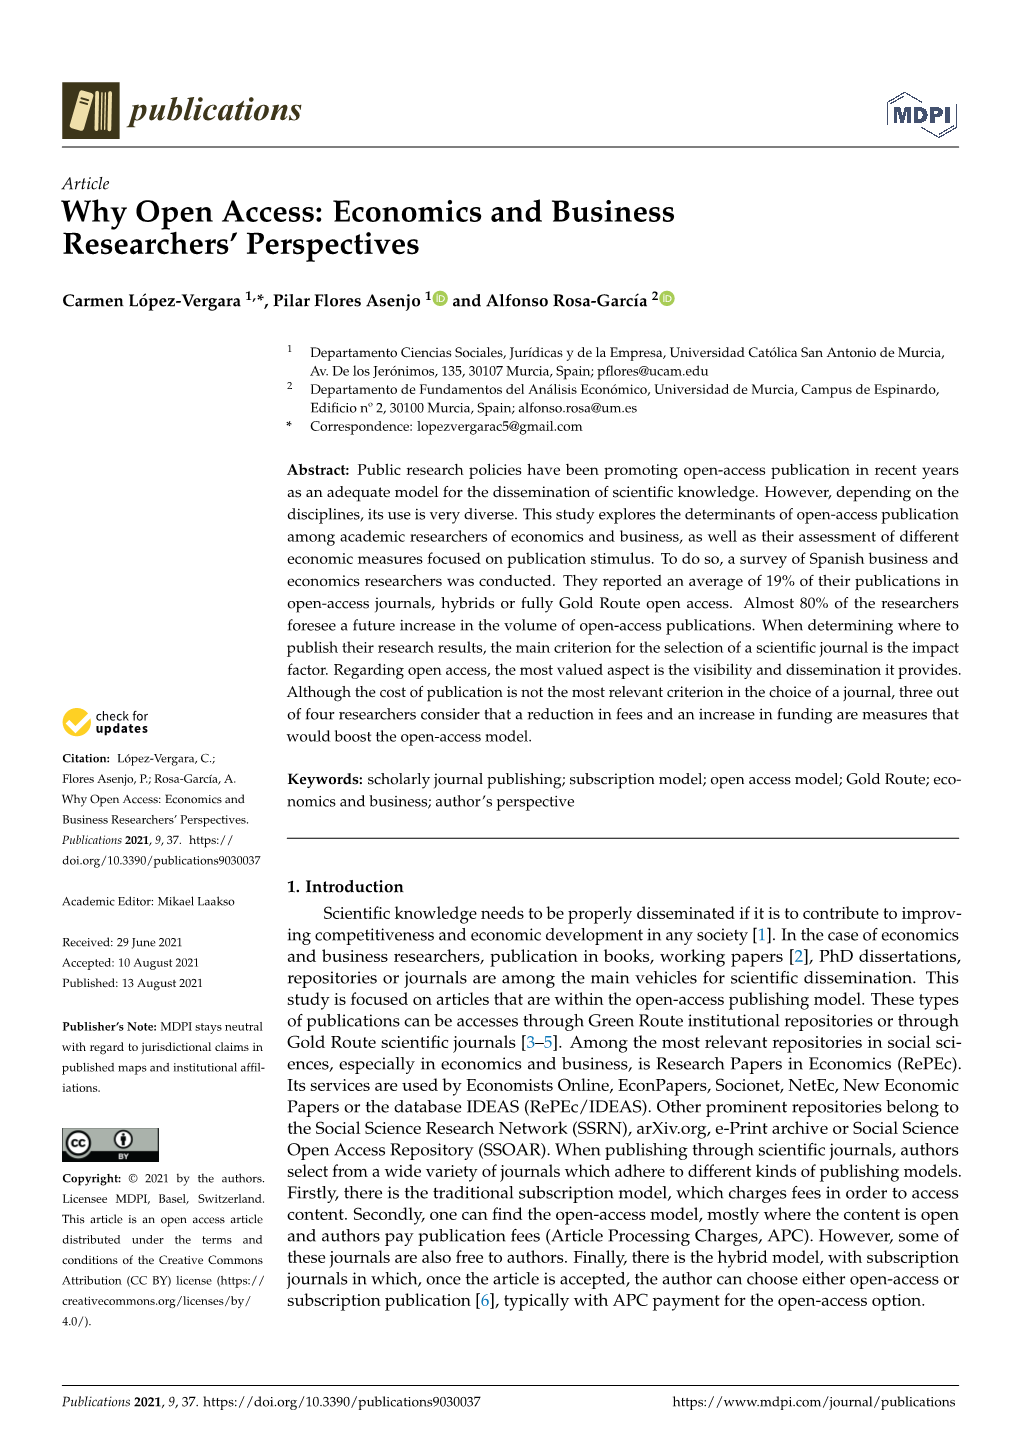 Why Open Access: Economics and Business Researchers' Perspectives